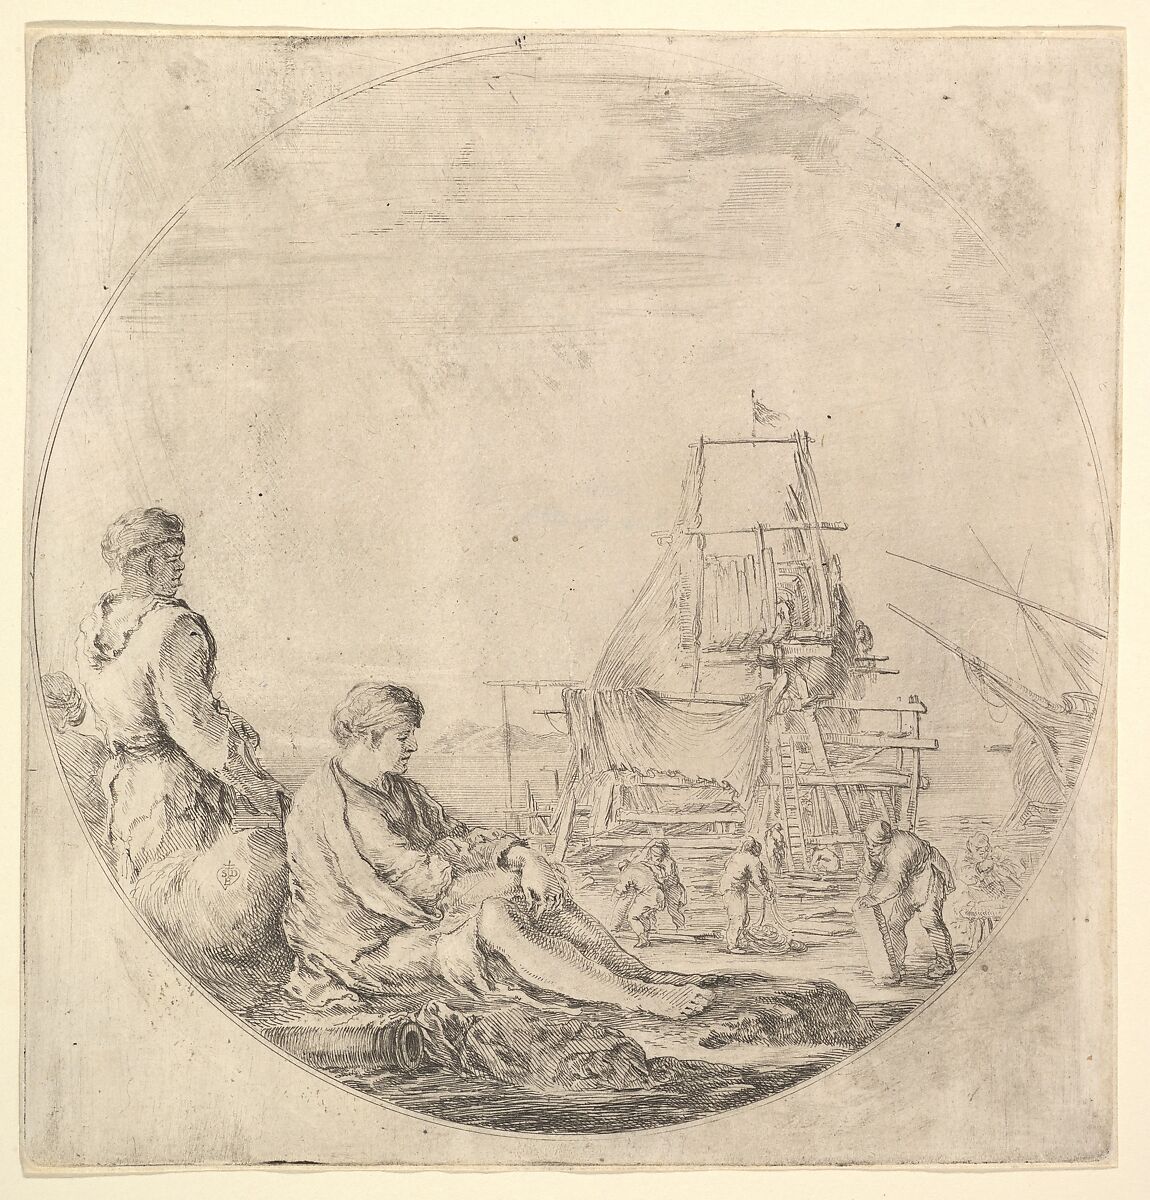 A Black sailor standing to left, in profile to the right, a White sailor seated in center with legs outstretched, a ship being repaired to right in the background, Stefano della Bella (Italian, Florence 1610–1664 Florence), Etching 